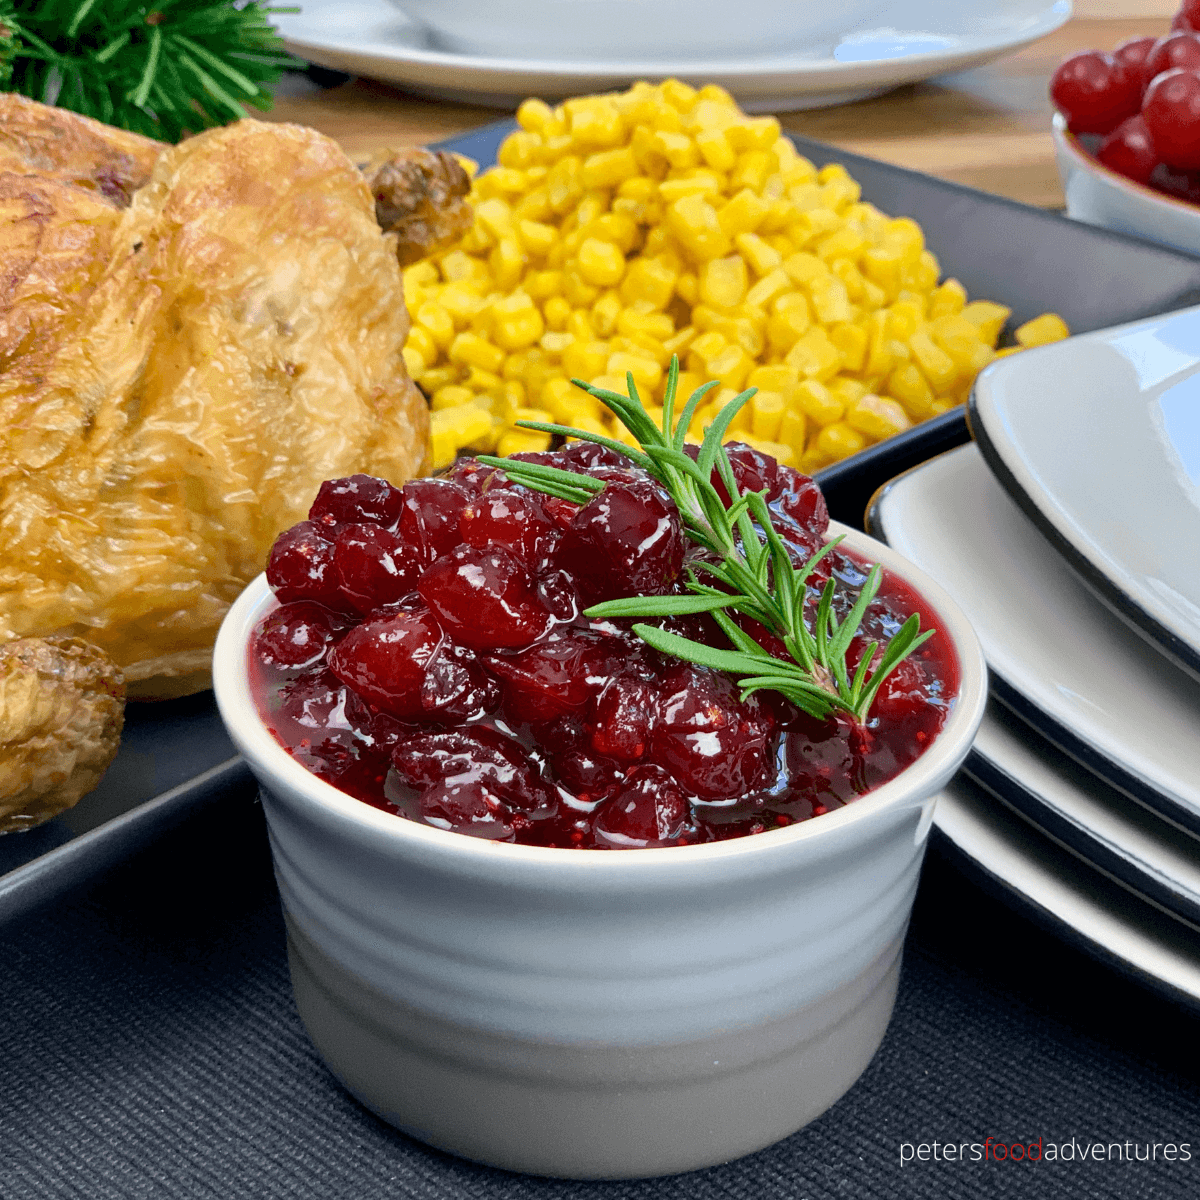 Homemade Cranberry Sauce recipe that's incredibly easy to make with only 3 ingredients. My secret is the Ginger Ale. This recipe can also be used to make Lingonberry Sauce, perfect for Thanksgiving or Christmas.